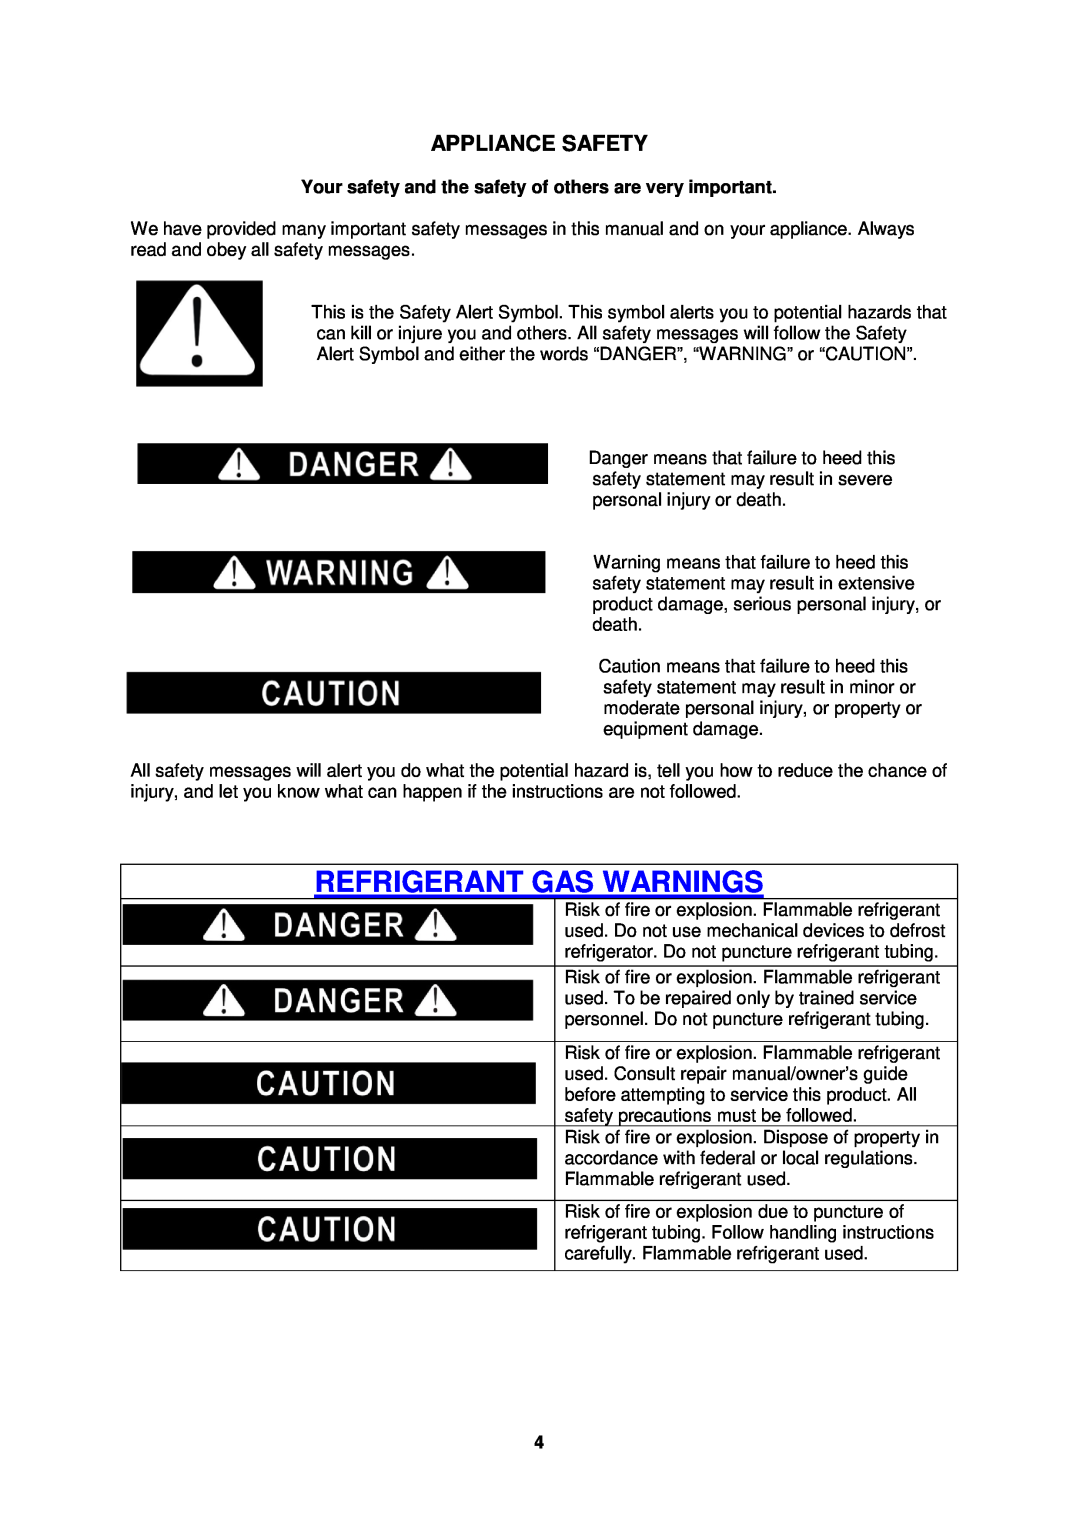 Avanti WC3406 Refrigerant Gas Warnings, Appliance Safety, Your safety and the safety of others are very important 